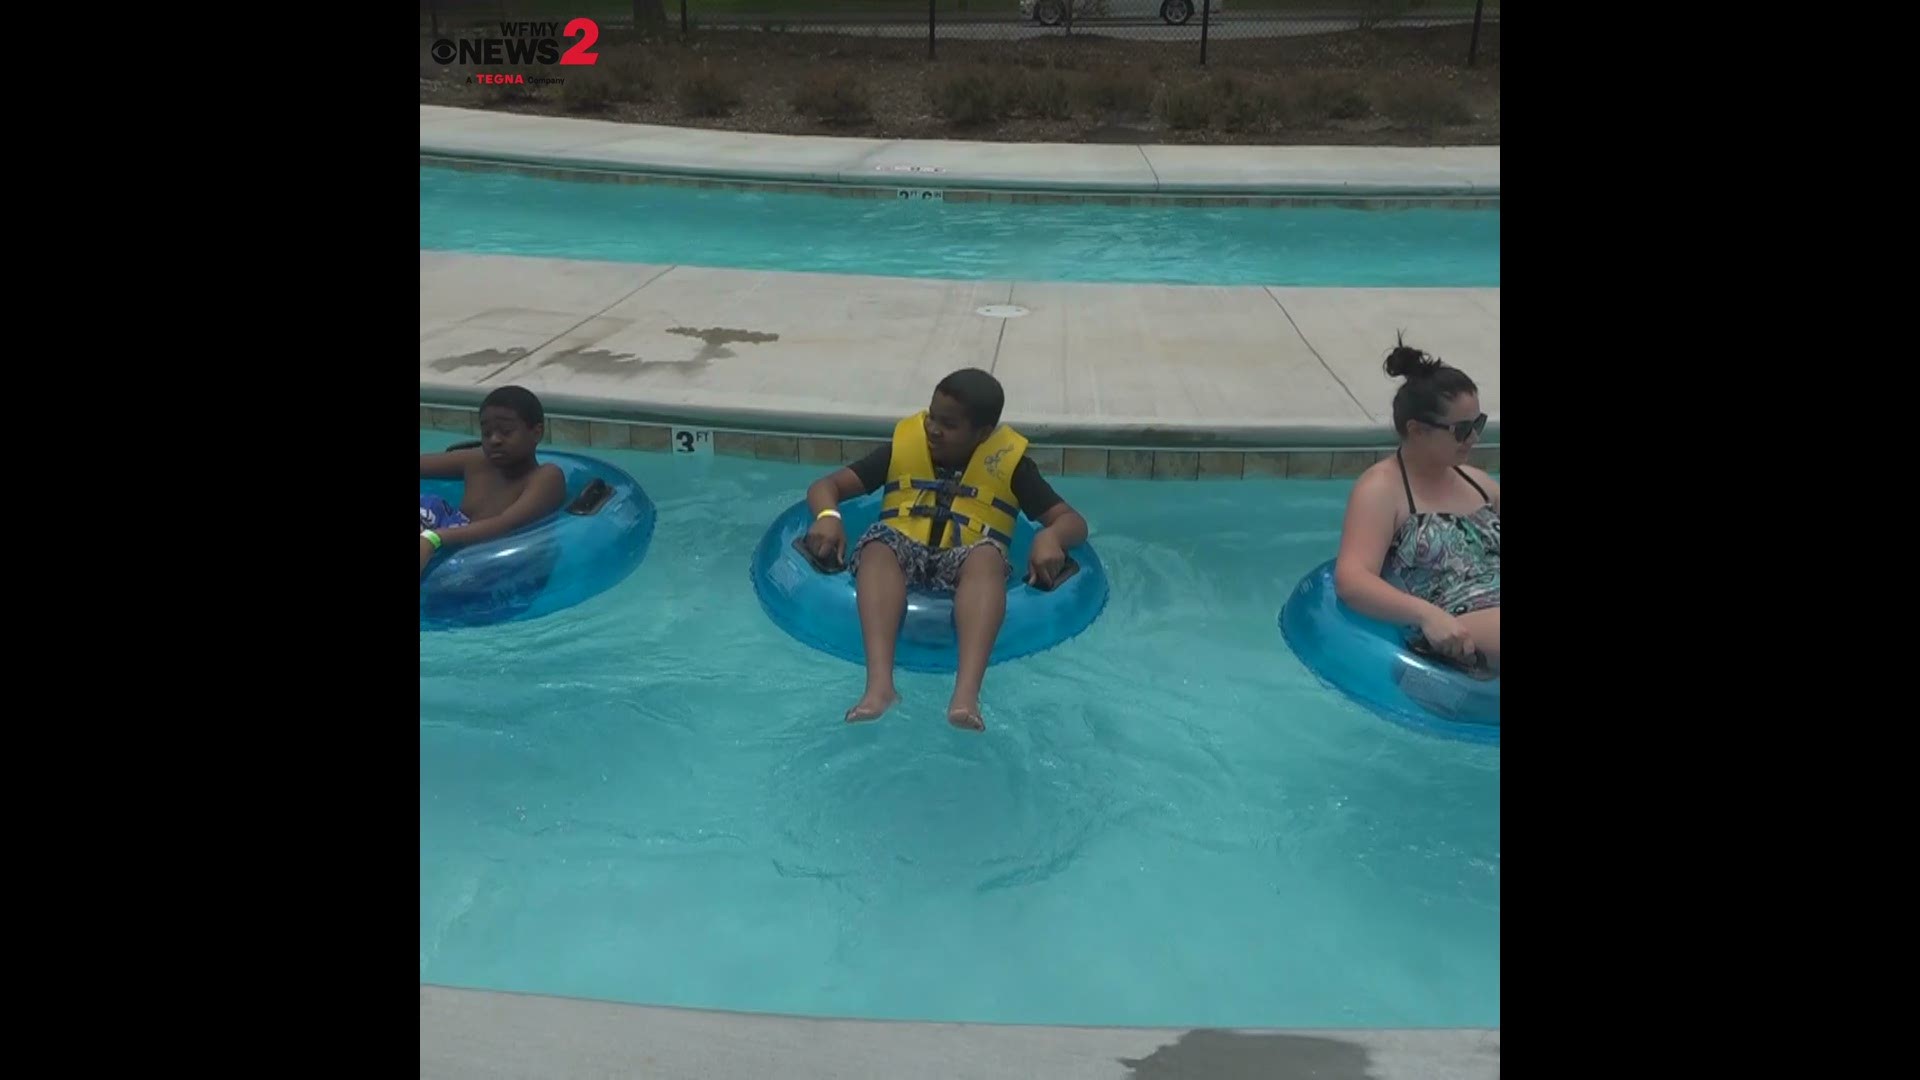 Winston-Salem opens its first water park, which includes a pool, lazy river, spray ground, water slides, changing rooms, concessions area and more.